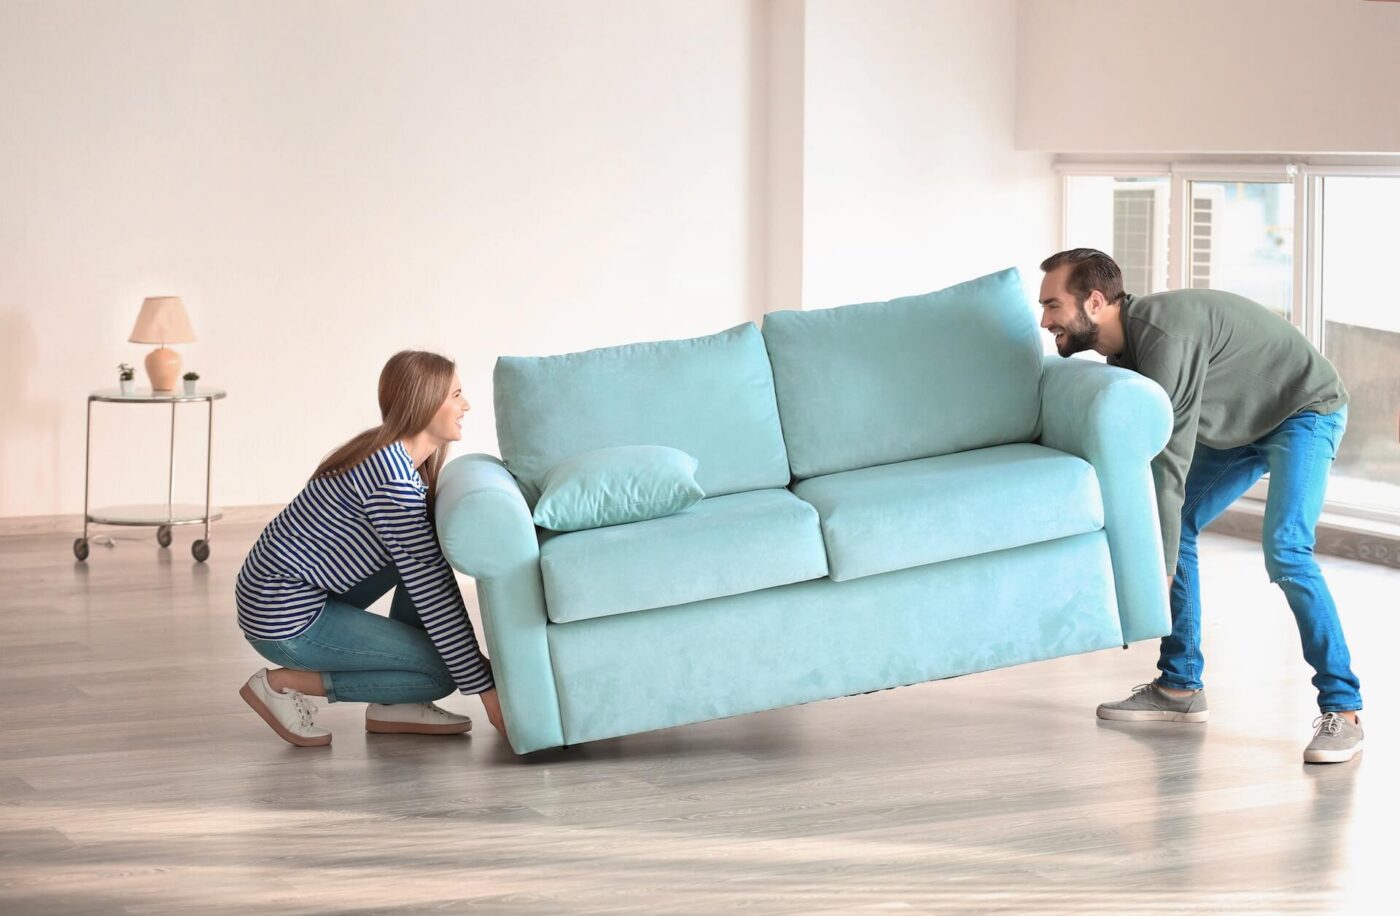 A man and woman lifting a turquoise sofa